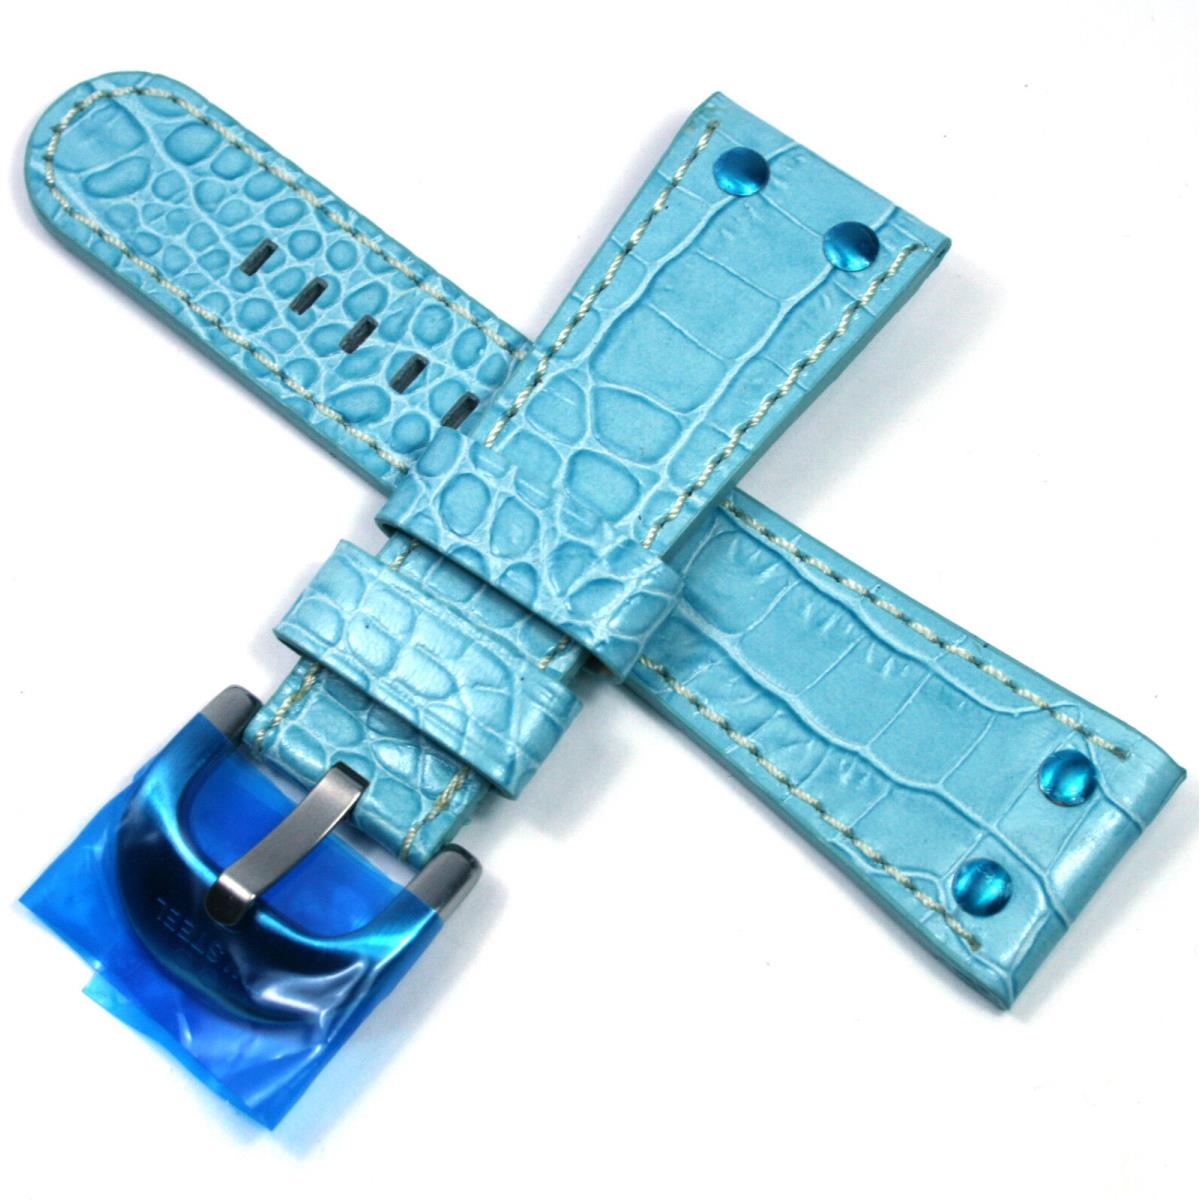 TW Steel Twb 80 Light Blue Leather Strap For Goliath 37MM Cases. 26MM Width